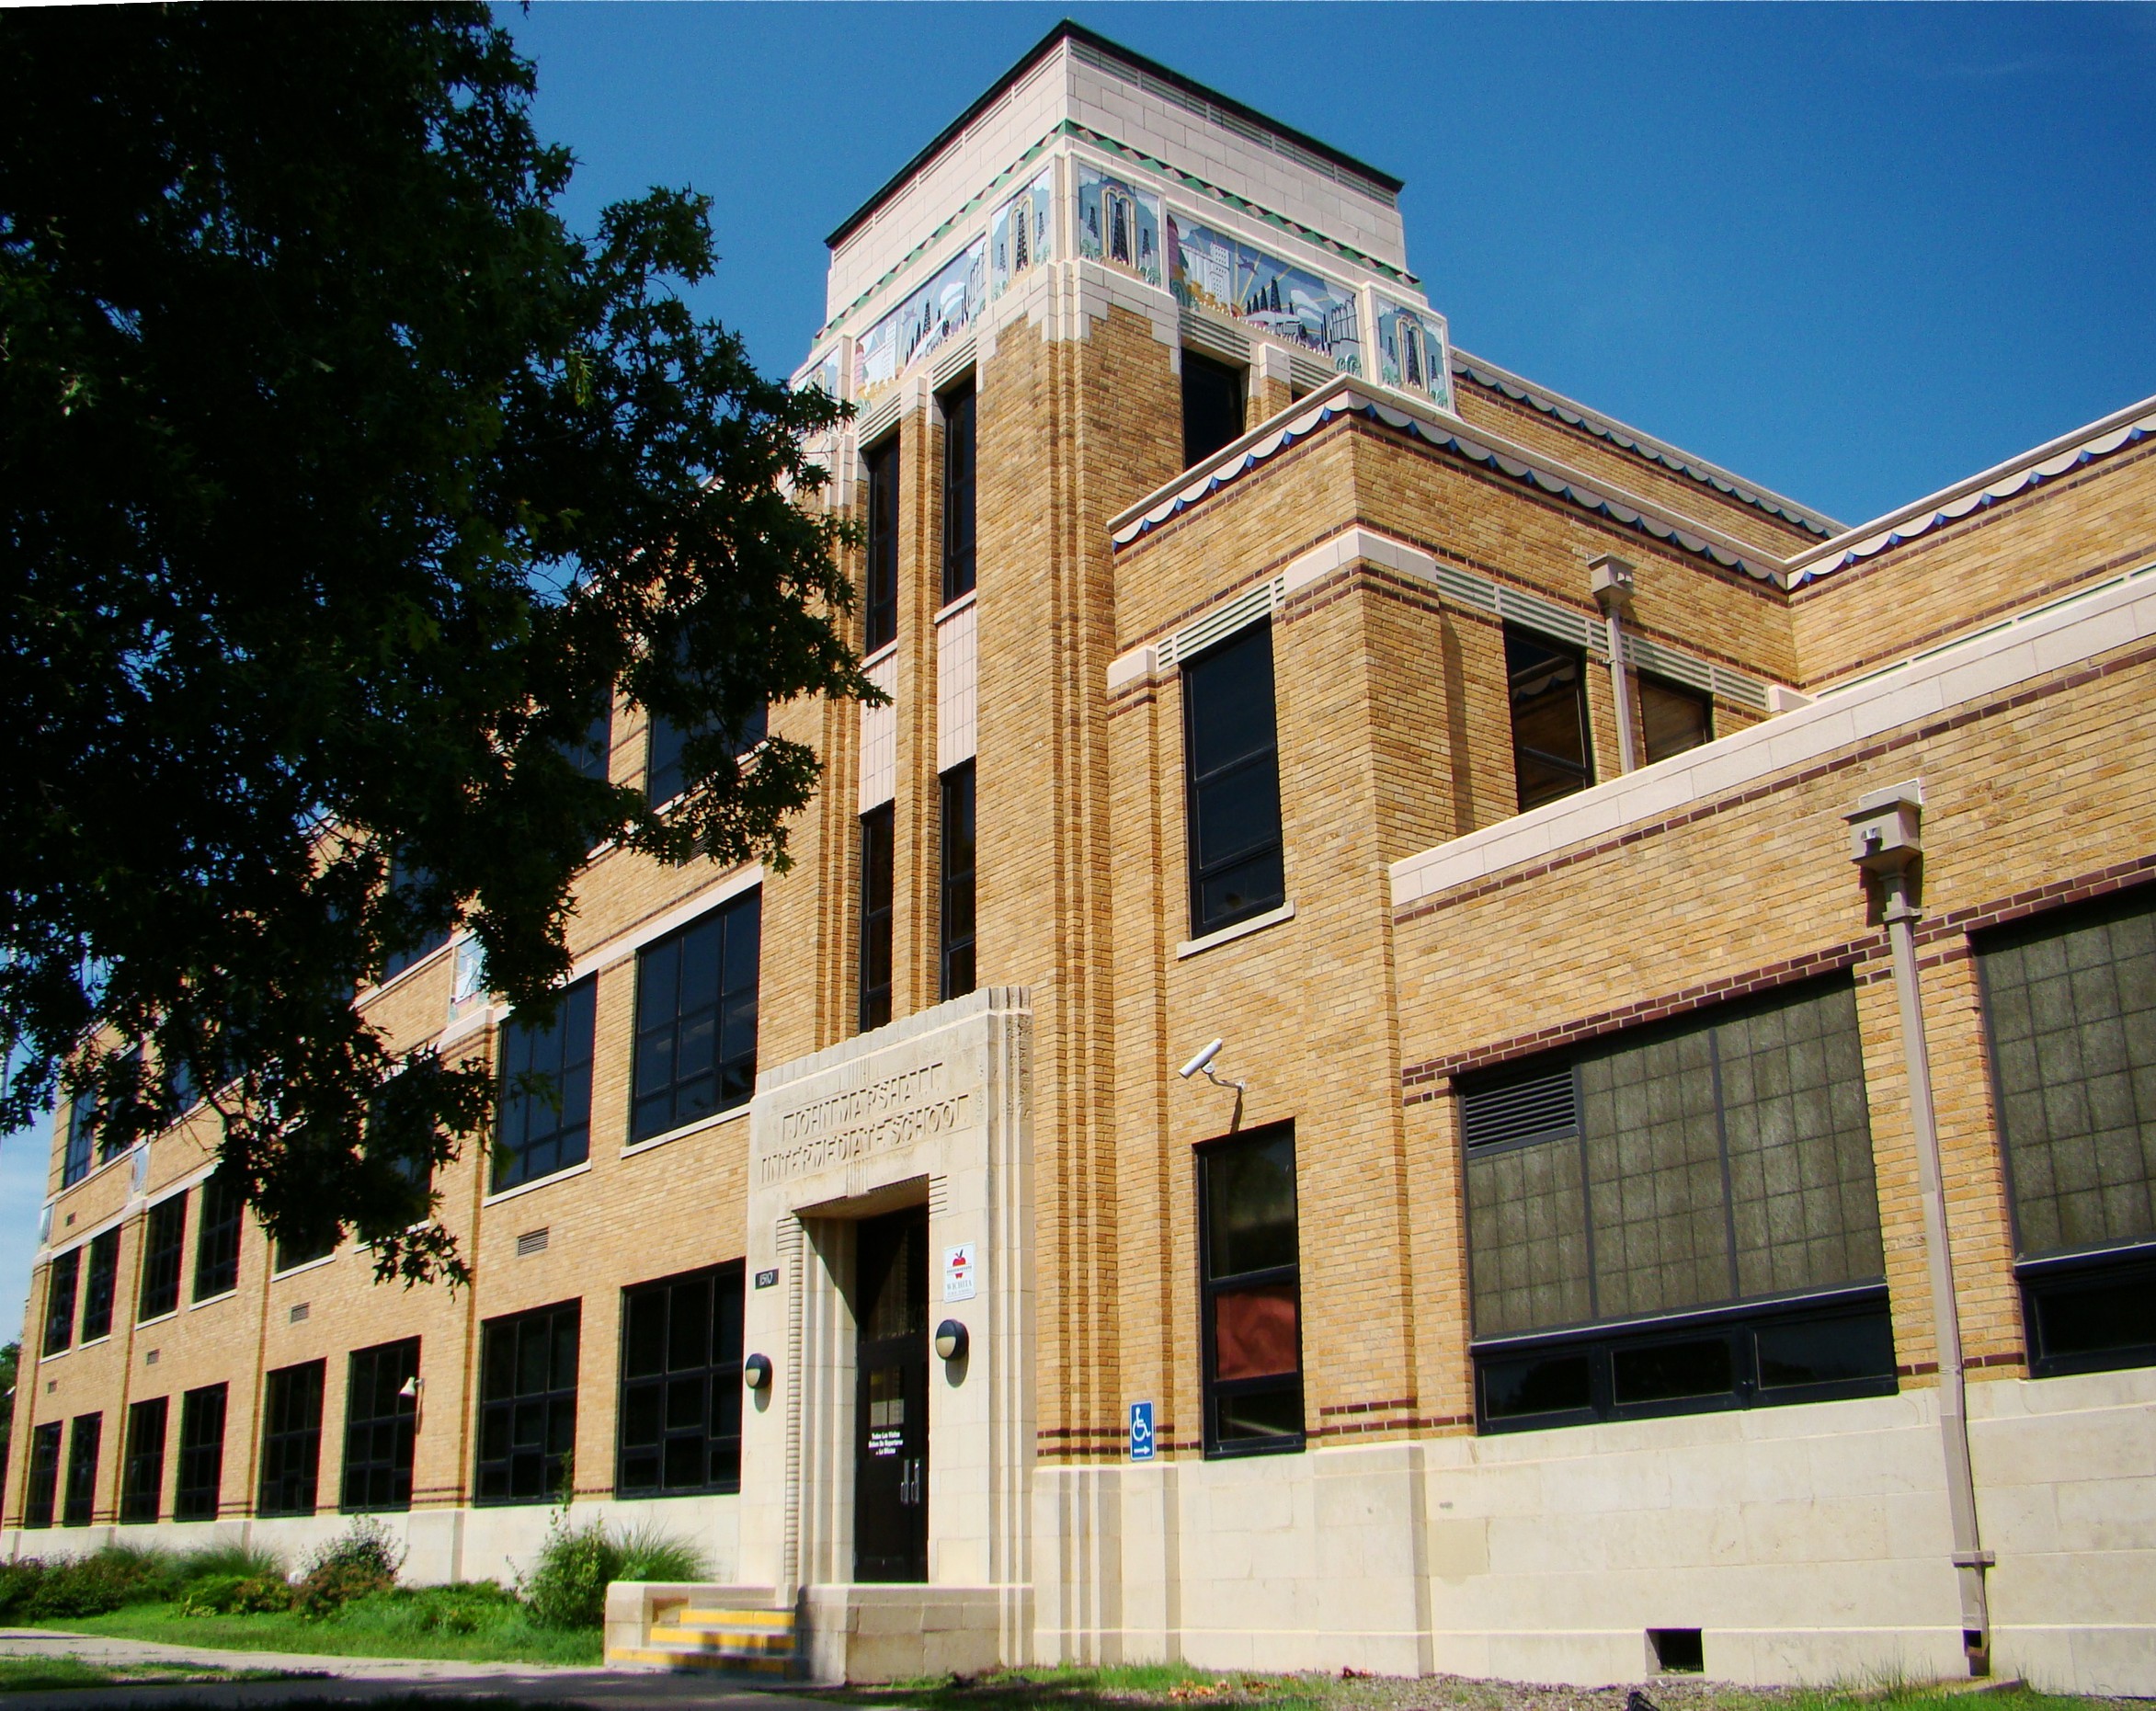 Image of the front of Marshall Middle School